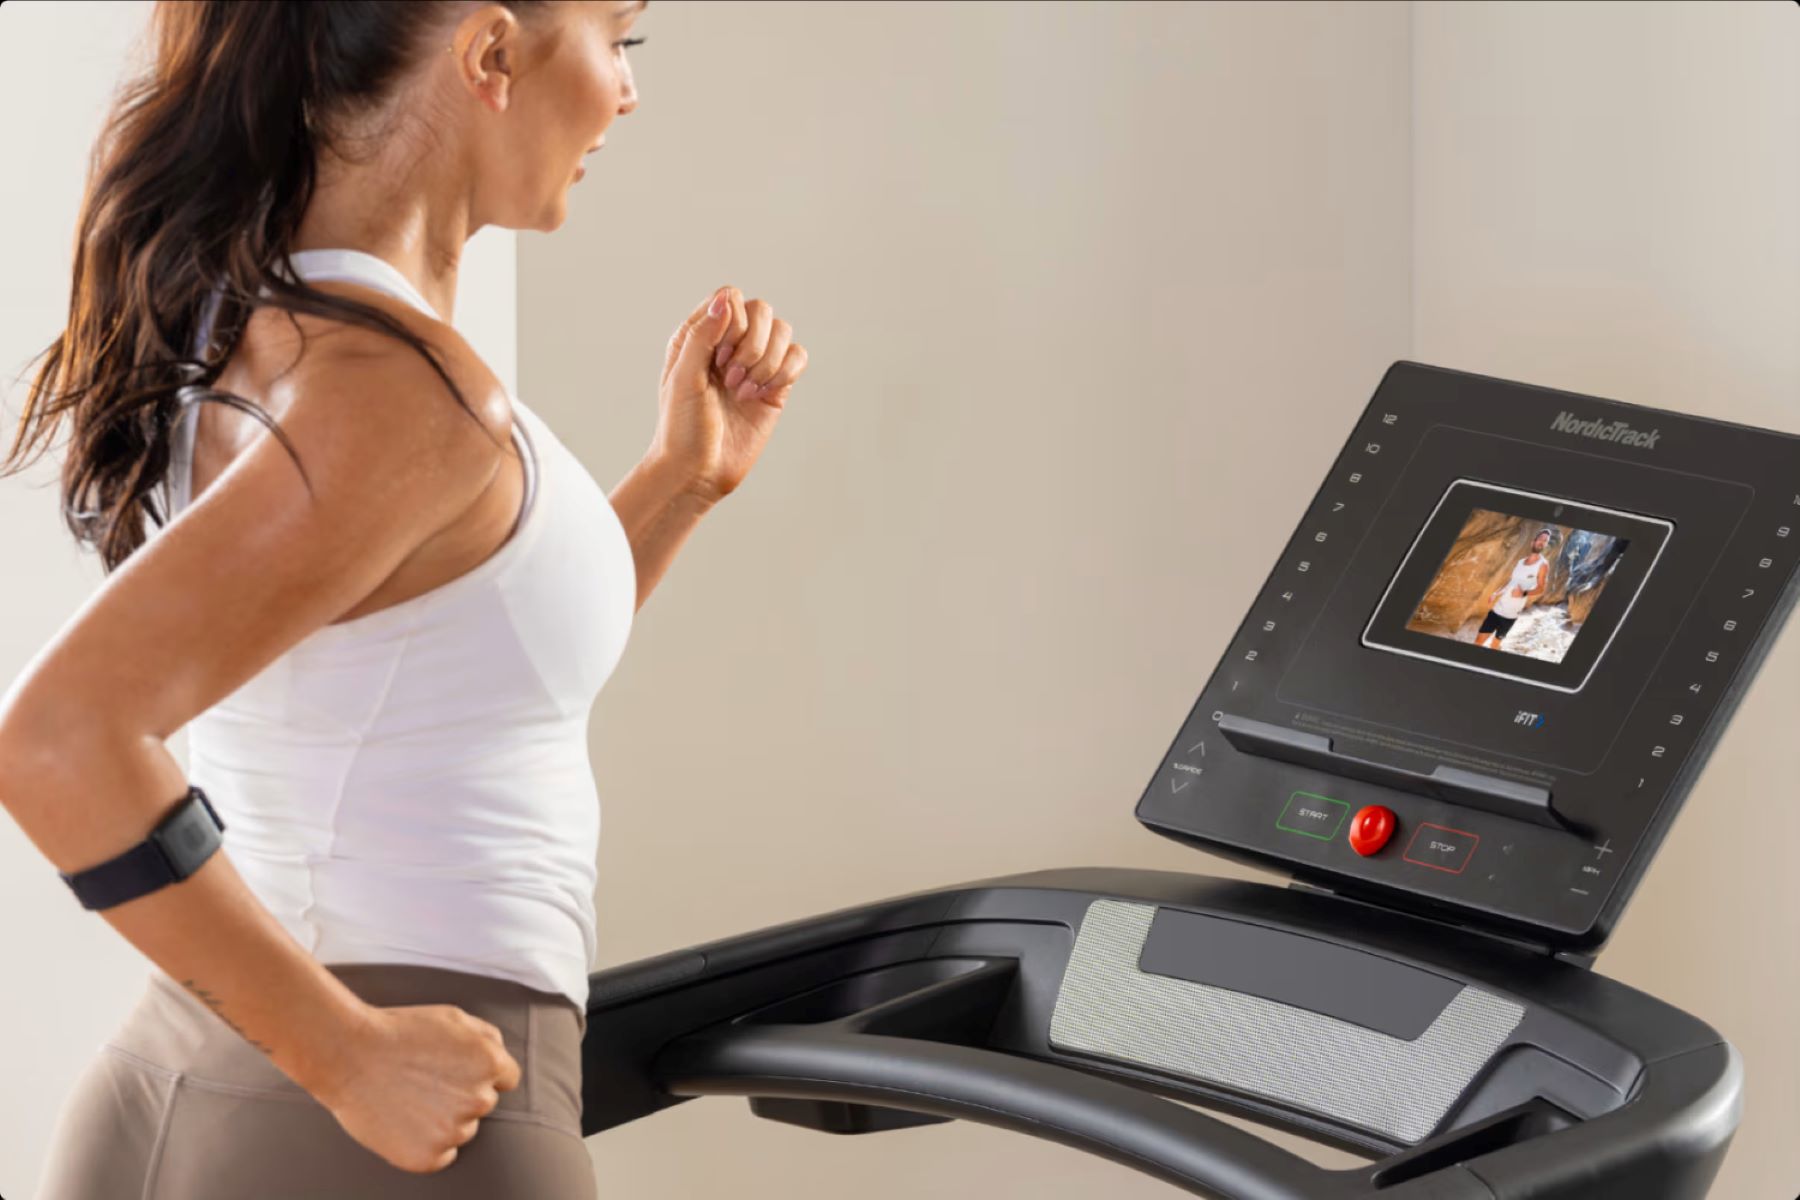 How To Turn Off NordicTrack Treadmill